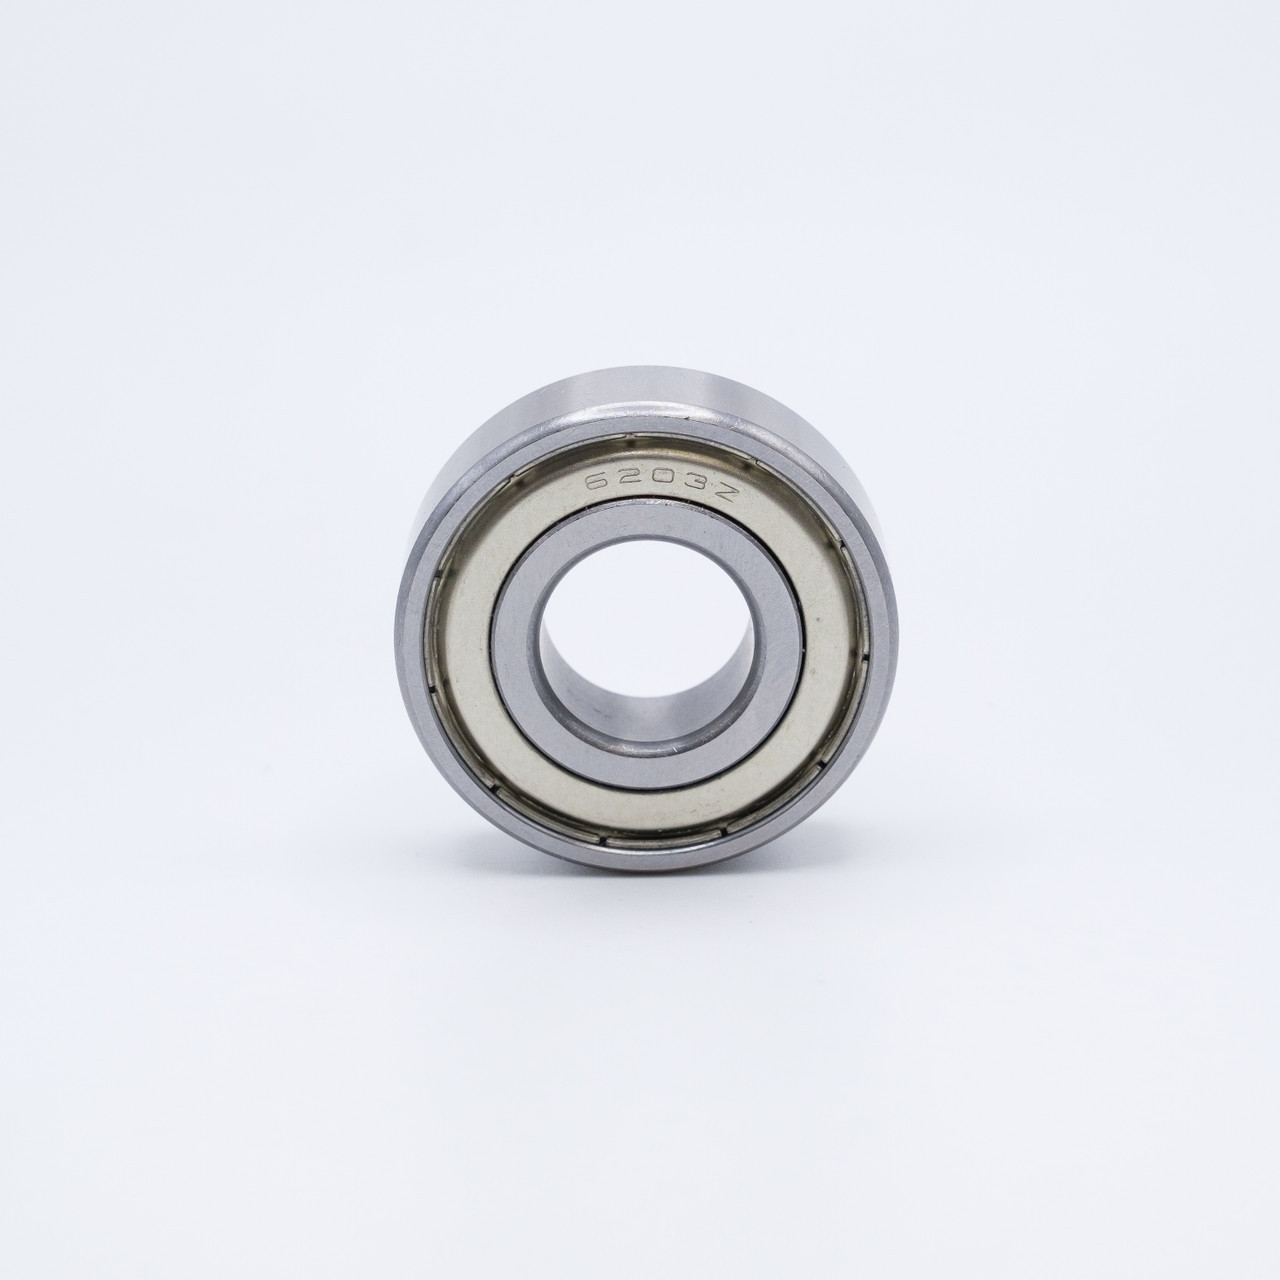 6203-ZZ-16 Special Size Ball Bearing 16x40x12mm Front View